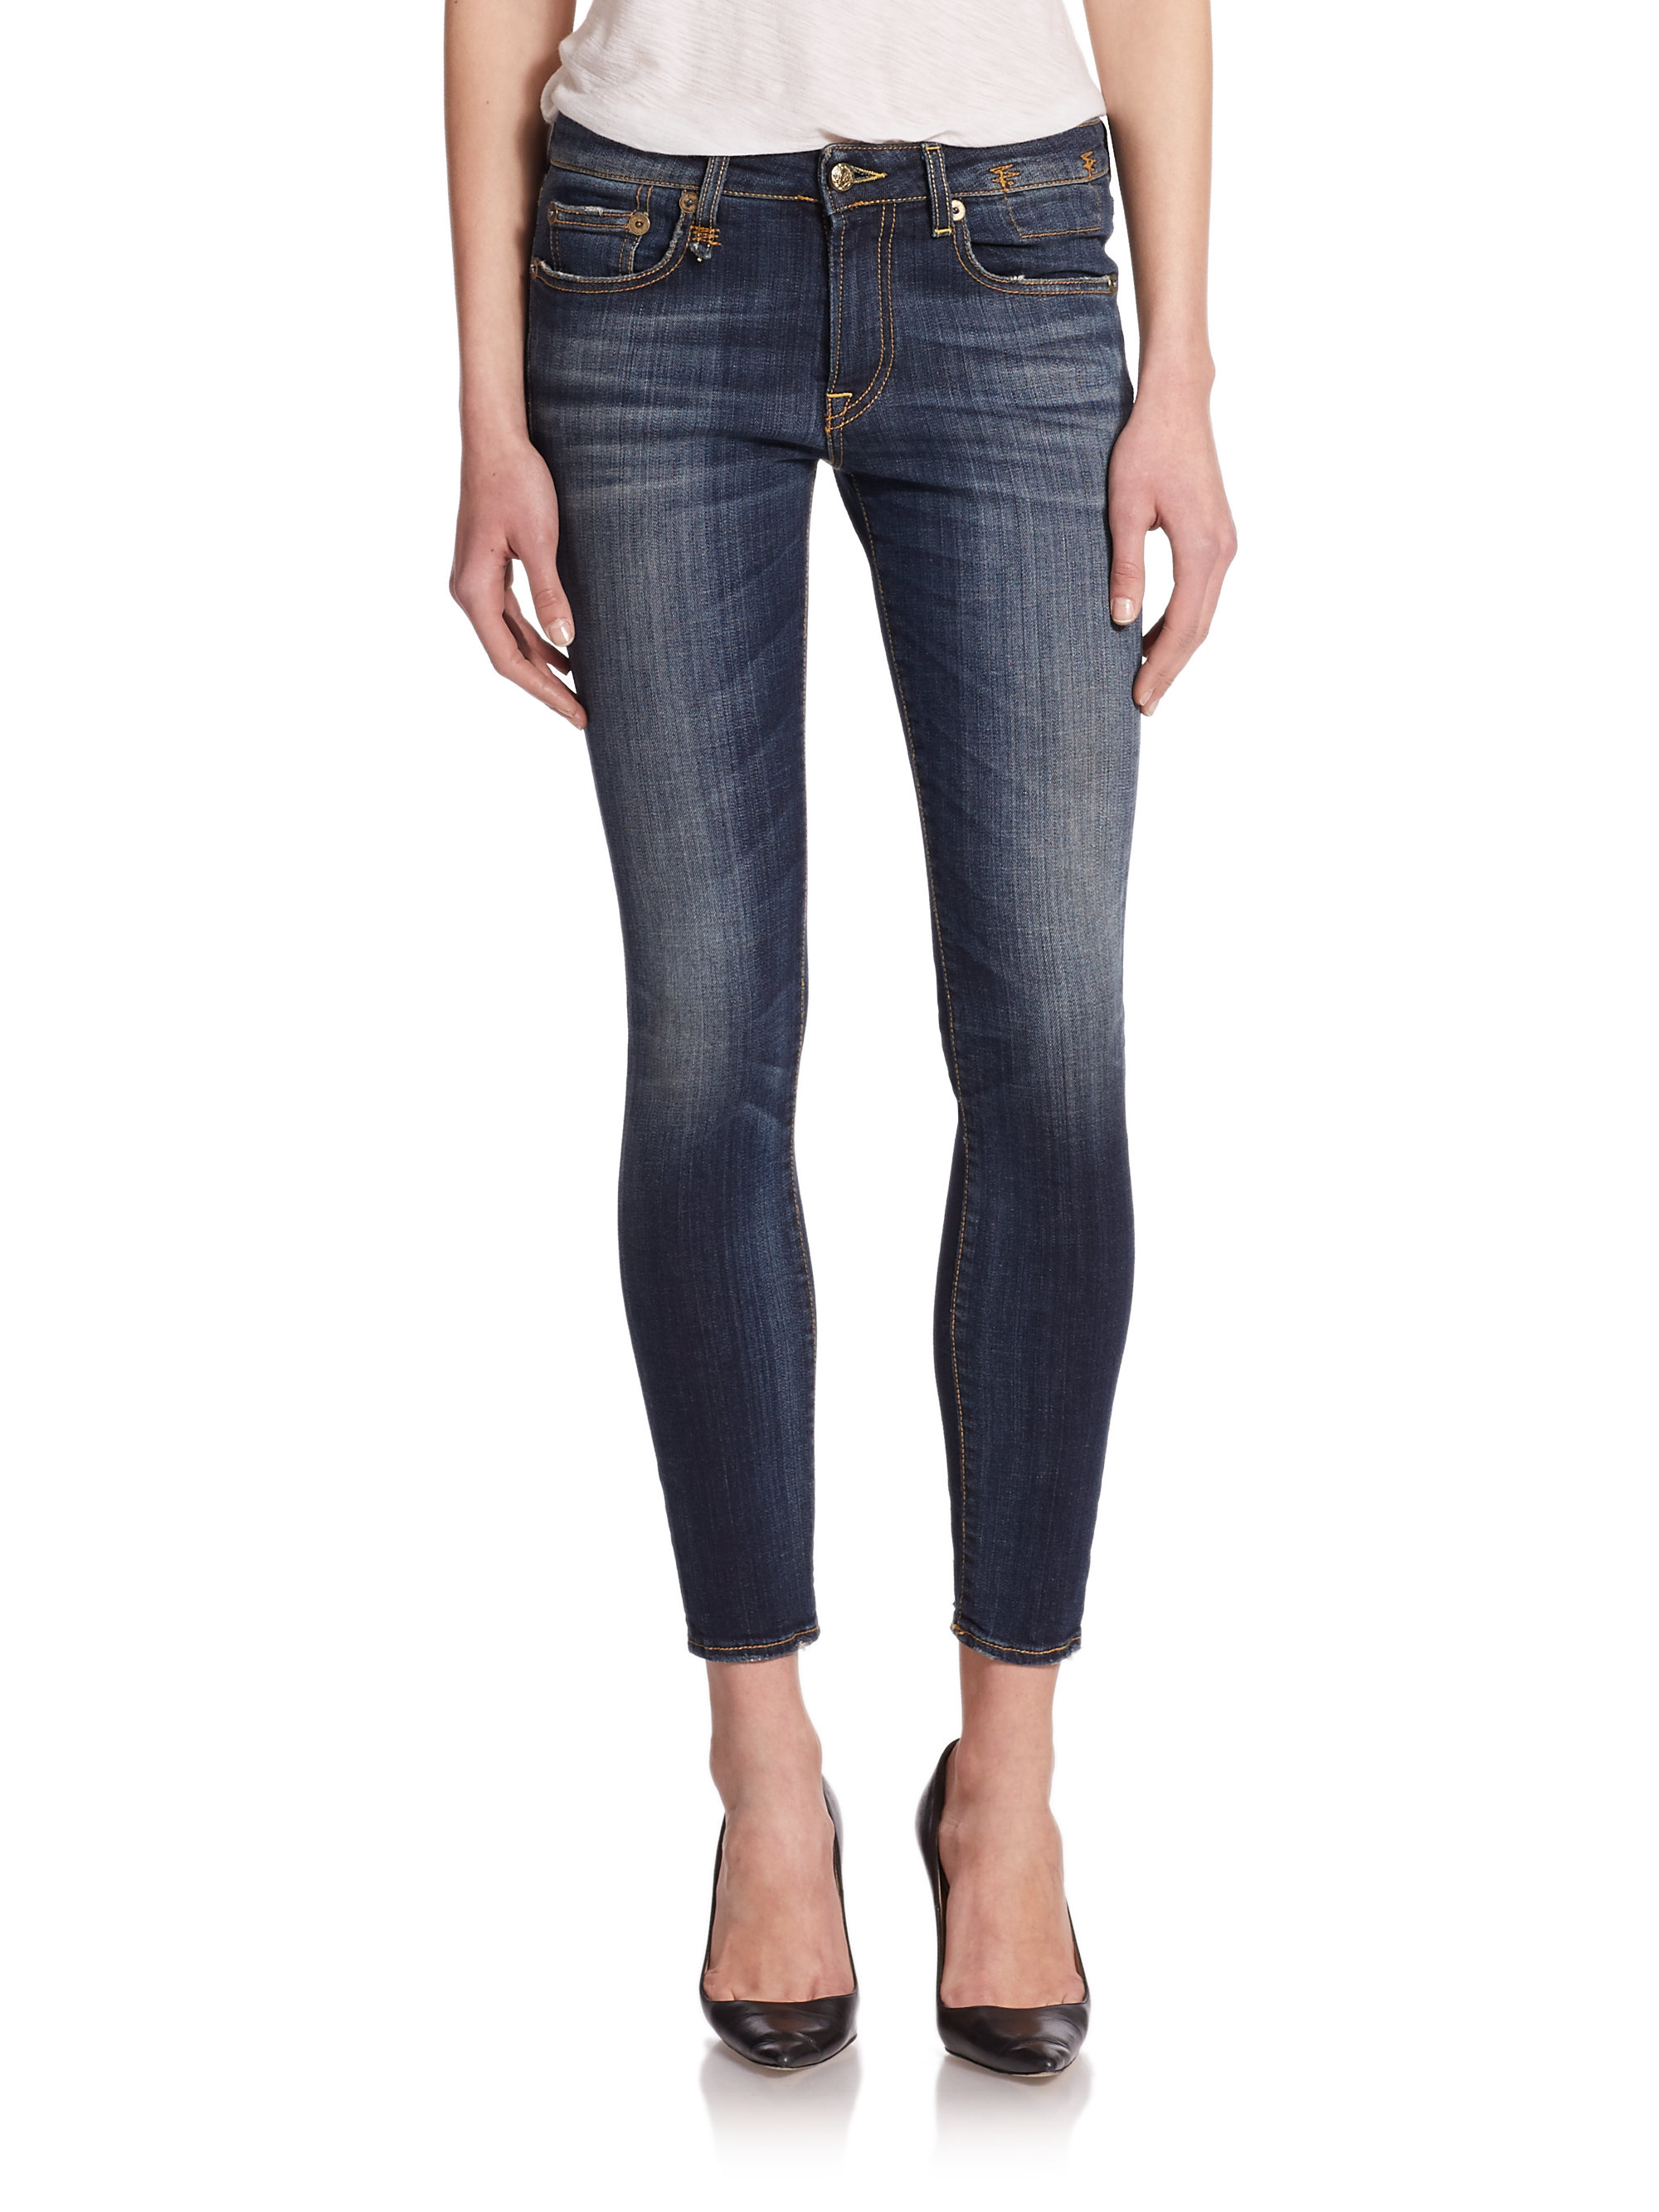 Lyst - R13 Alison Cropped Skinny Jeans in Blue